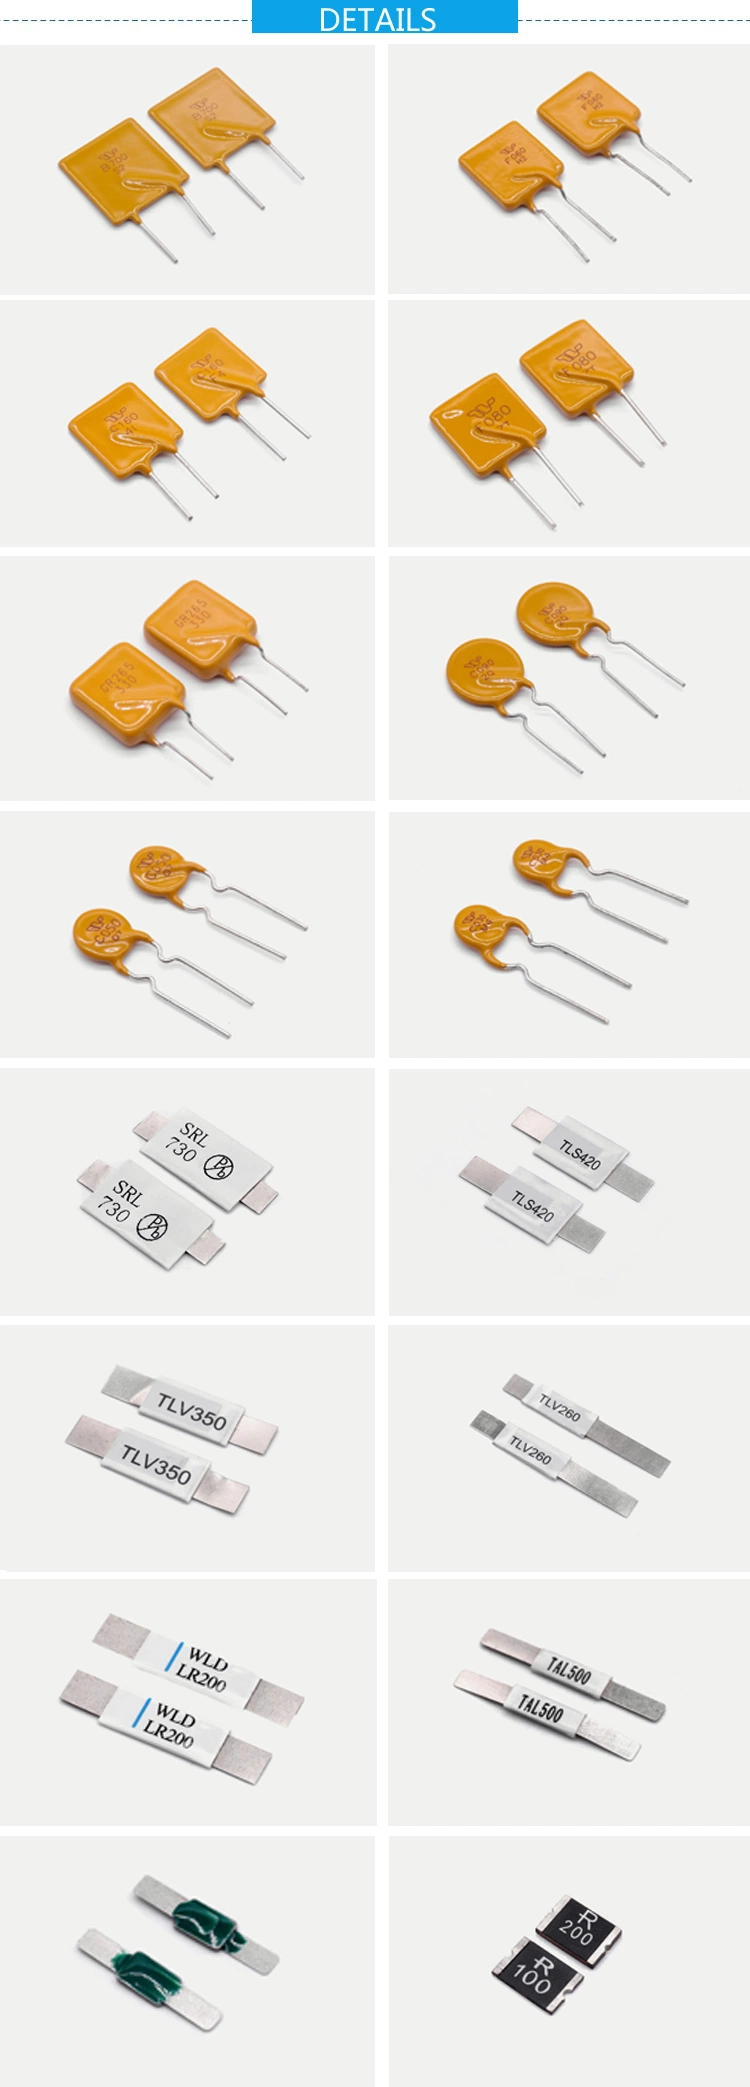 1812 Surface Mount SMD Resettable Fuses